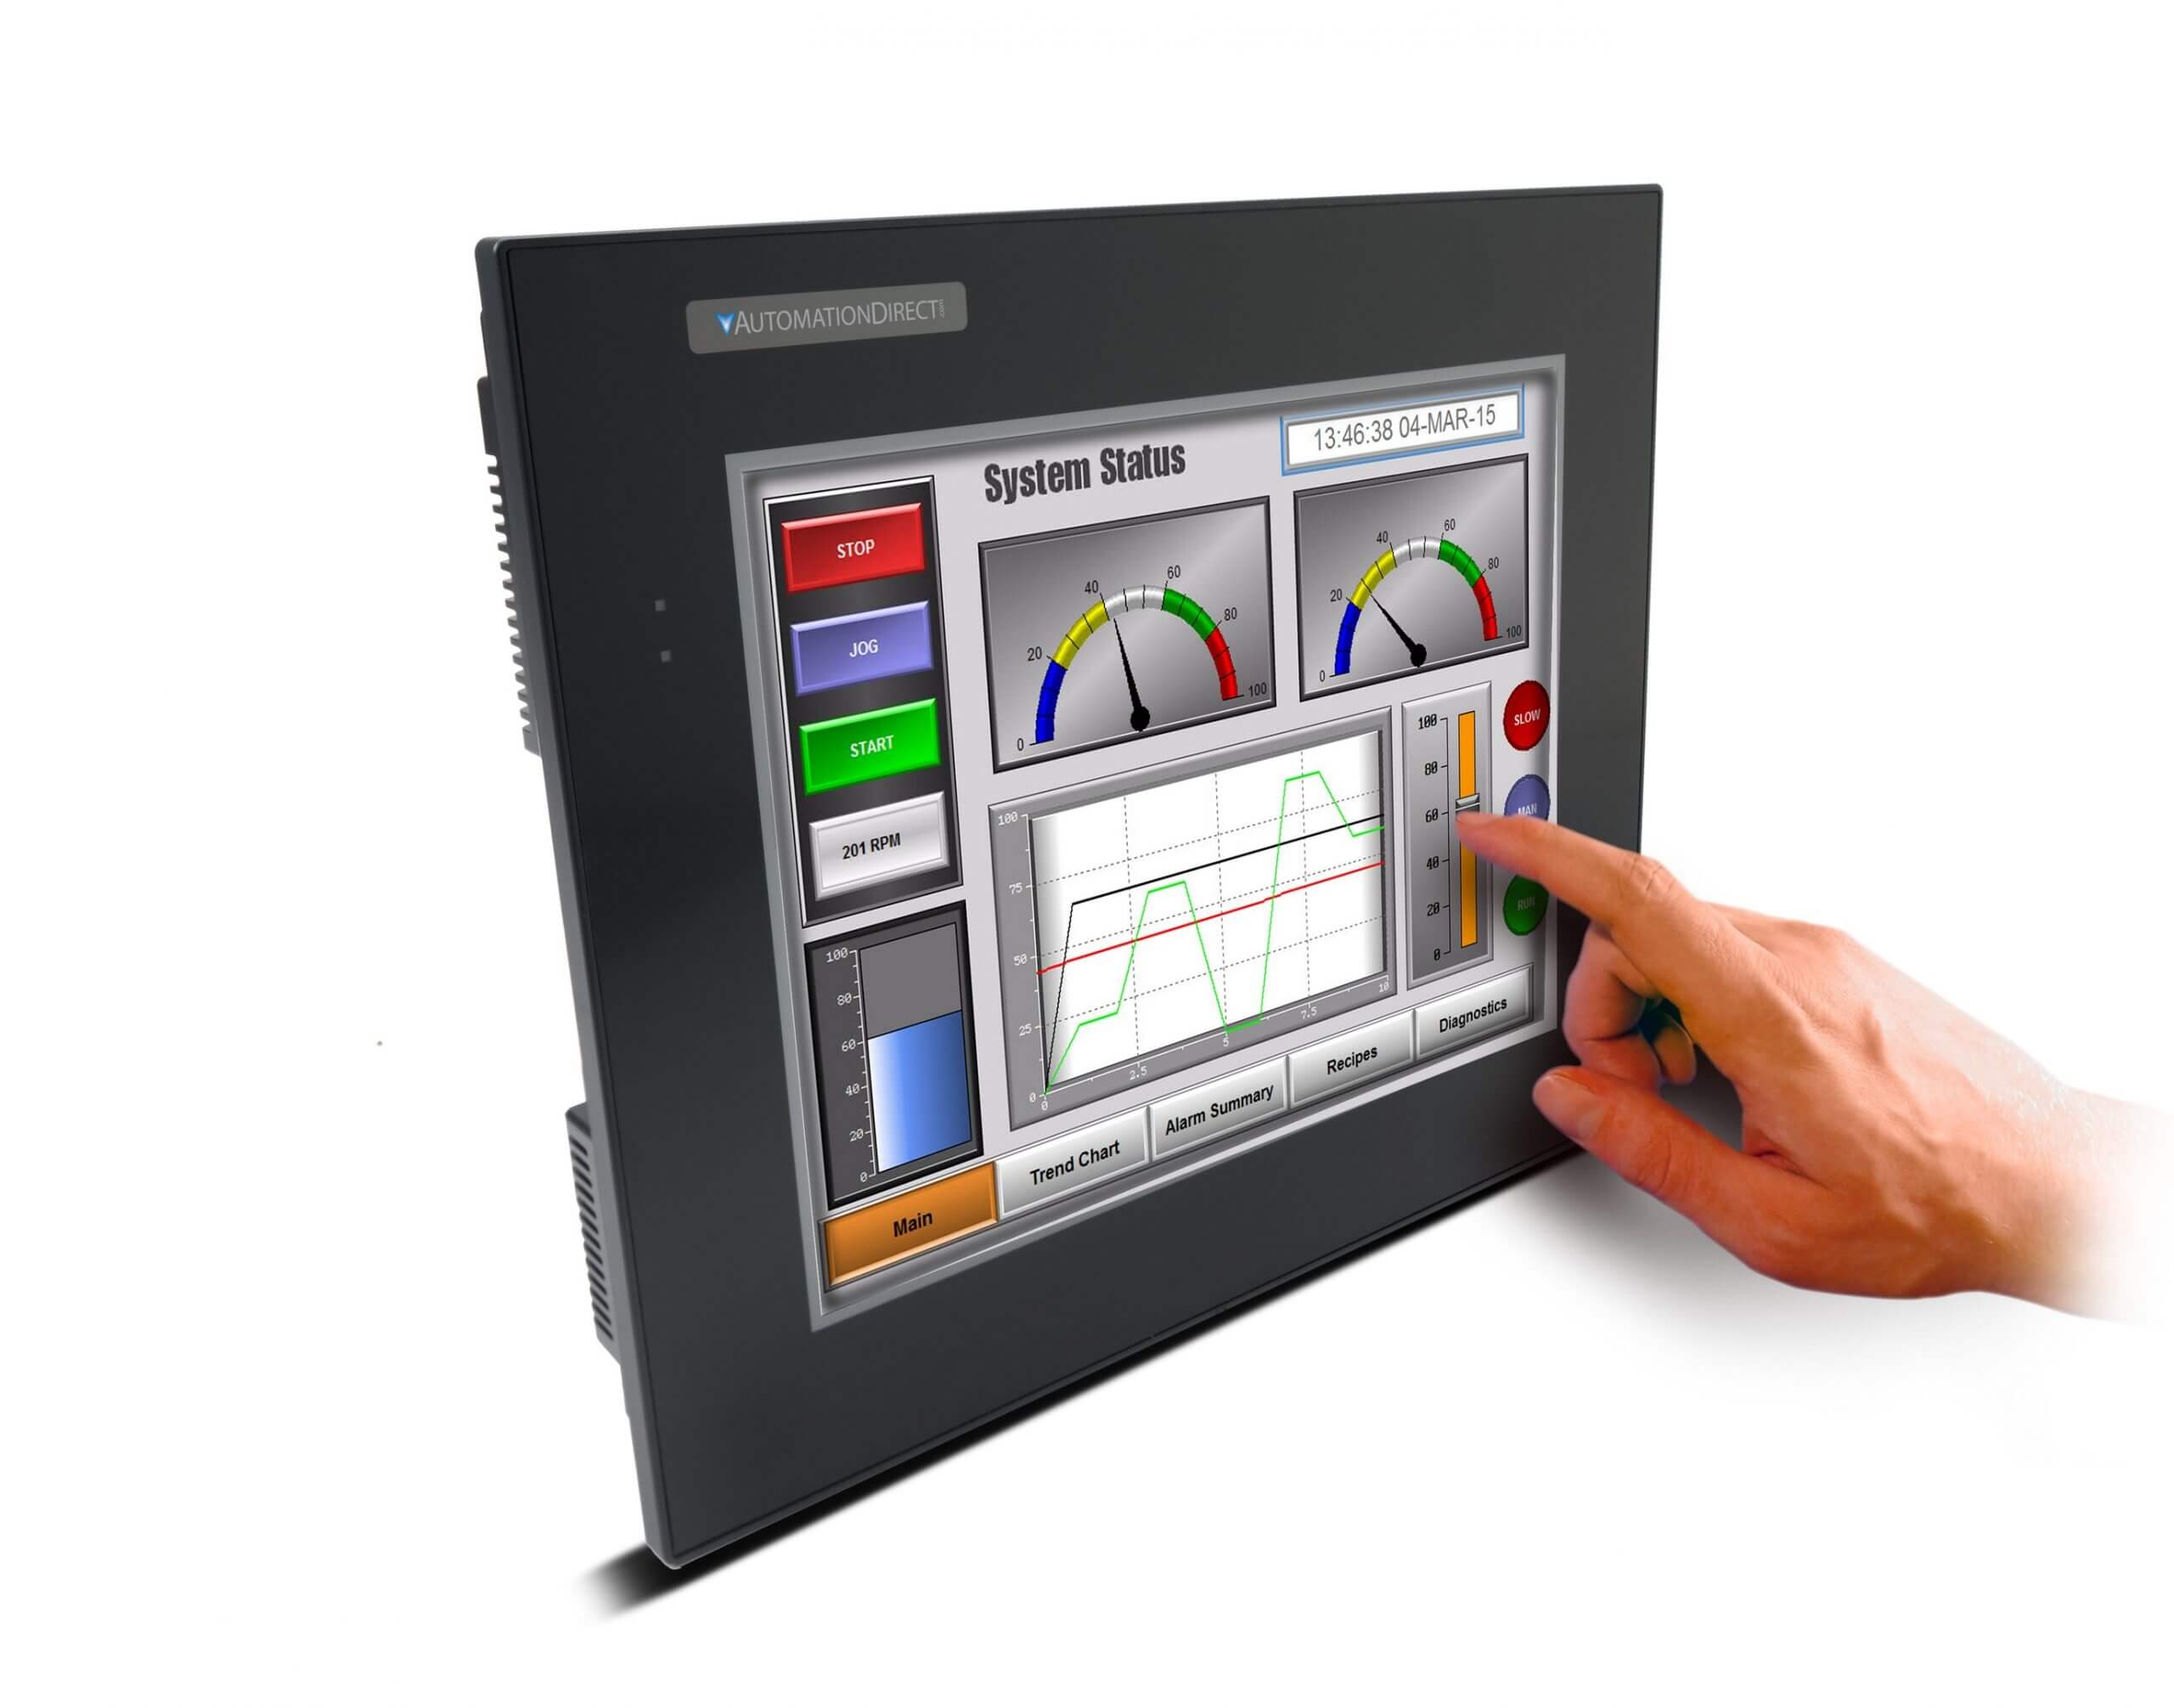 Keep Things Simple to Create Great Automation HMI Designs for Your Applications